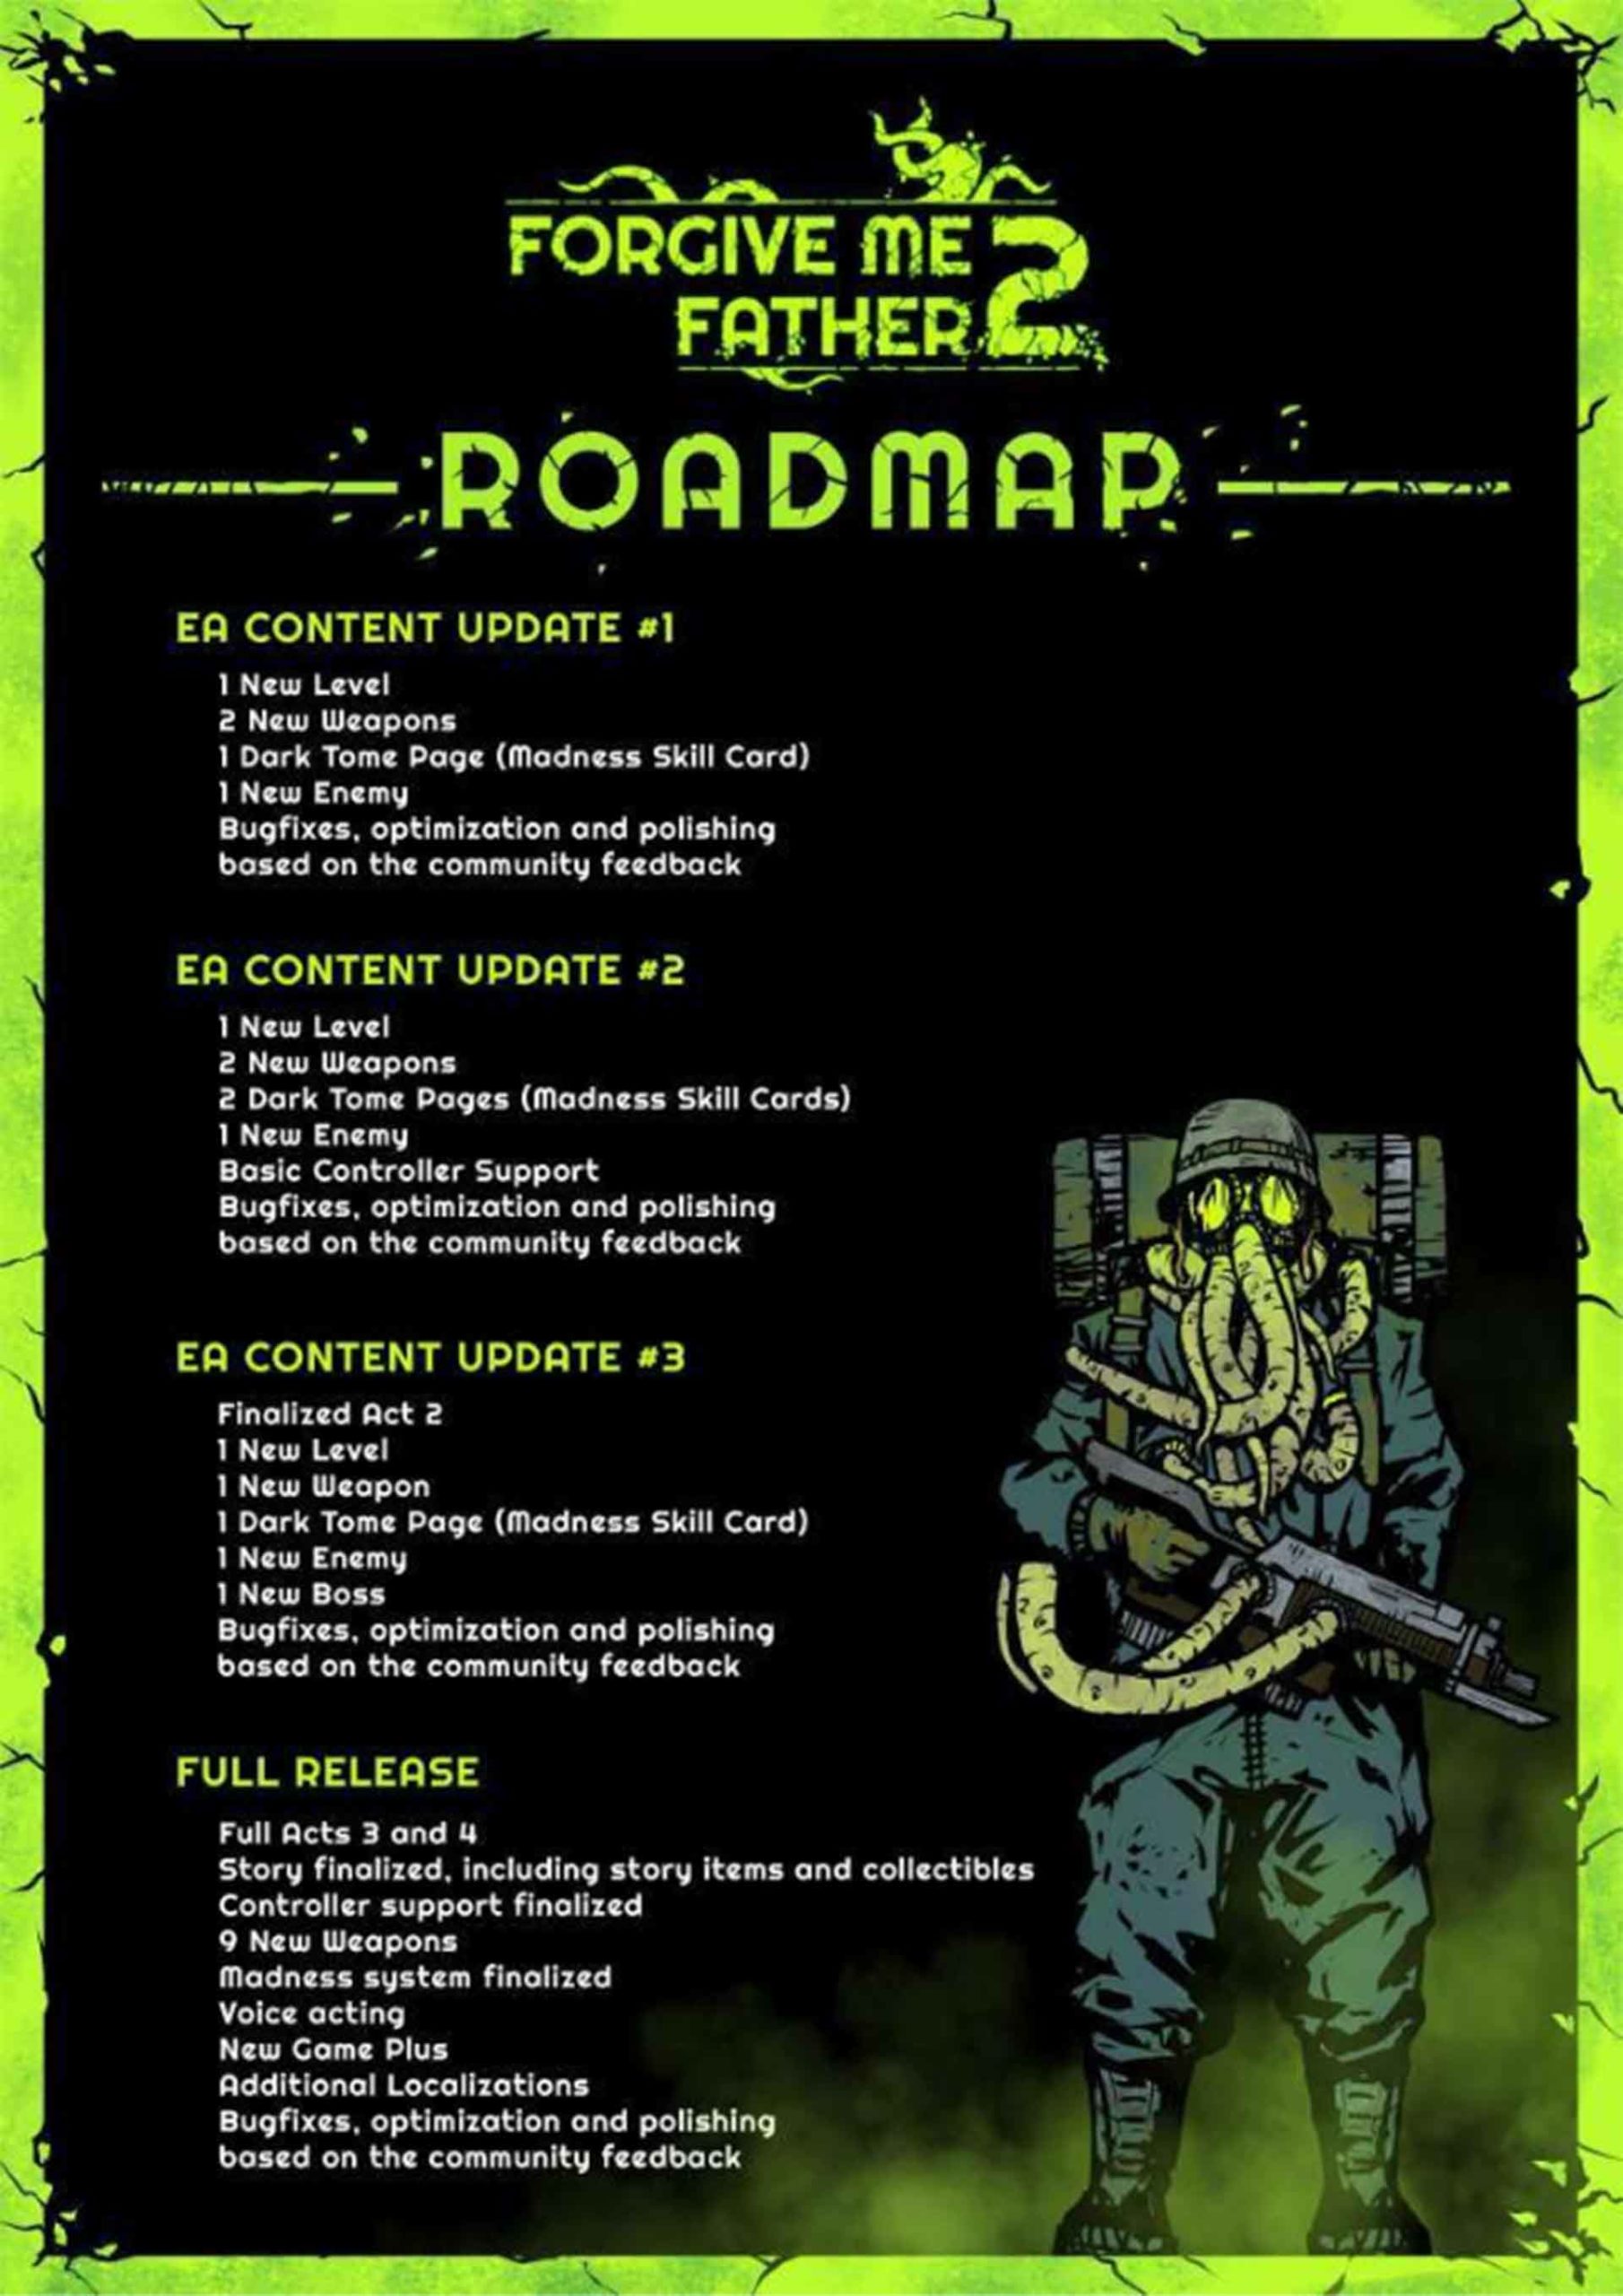 Forgive me Father 2 early access roadmap